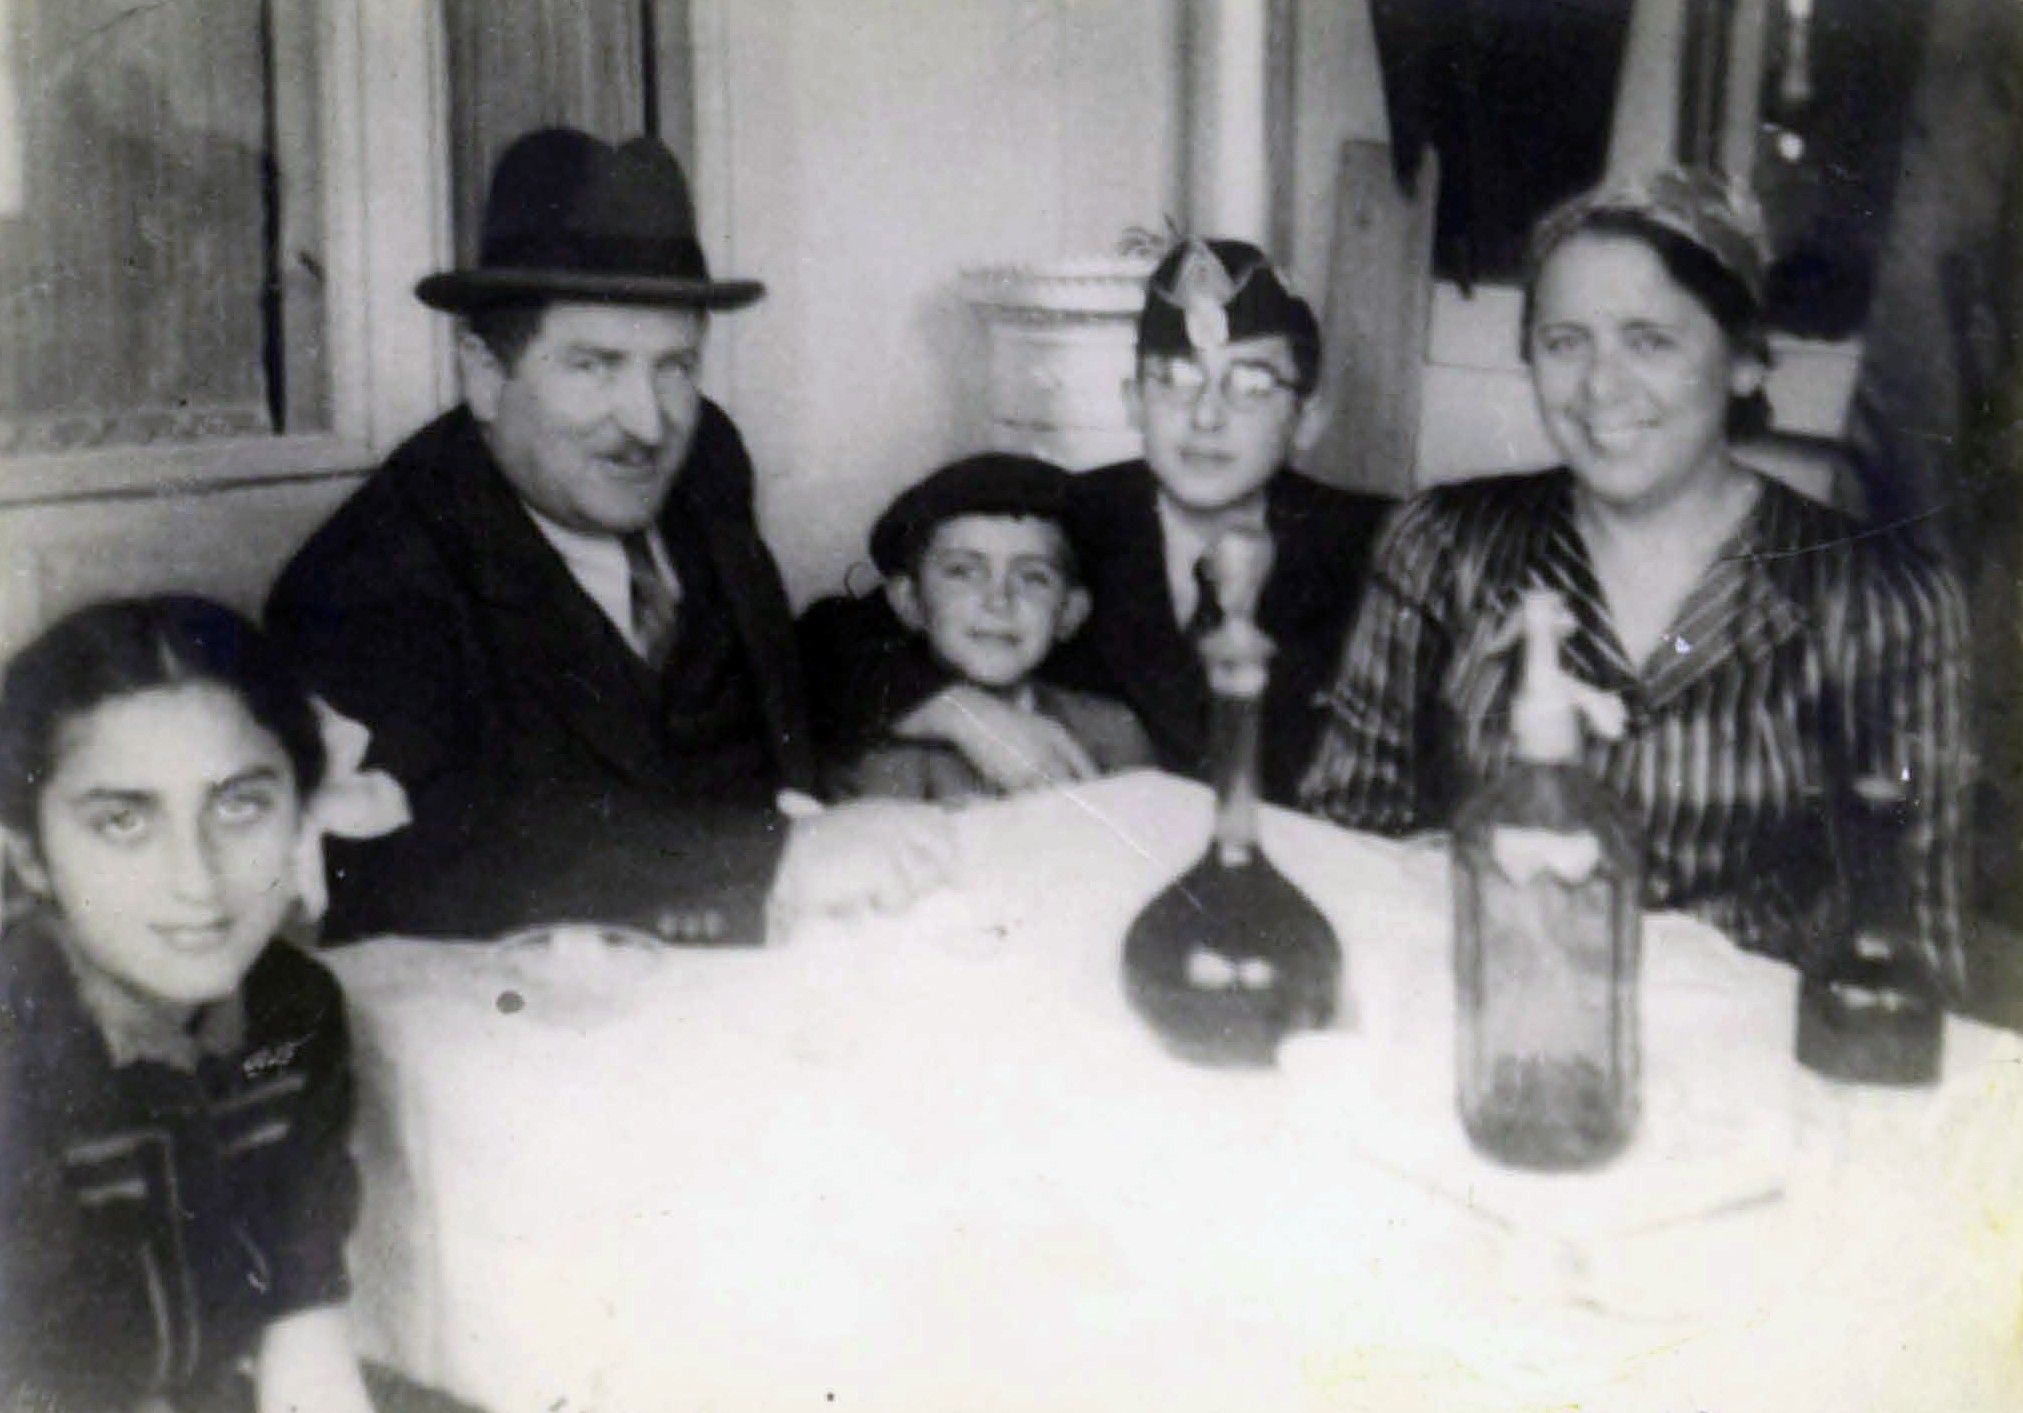  Dr. Alan Haber’s father Michael Haber (second from right) with his parents Bernard and Ilona, sister Olga* and brother Kalman*, Czechoslovakia circa 1943